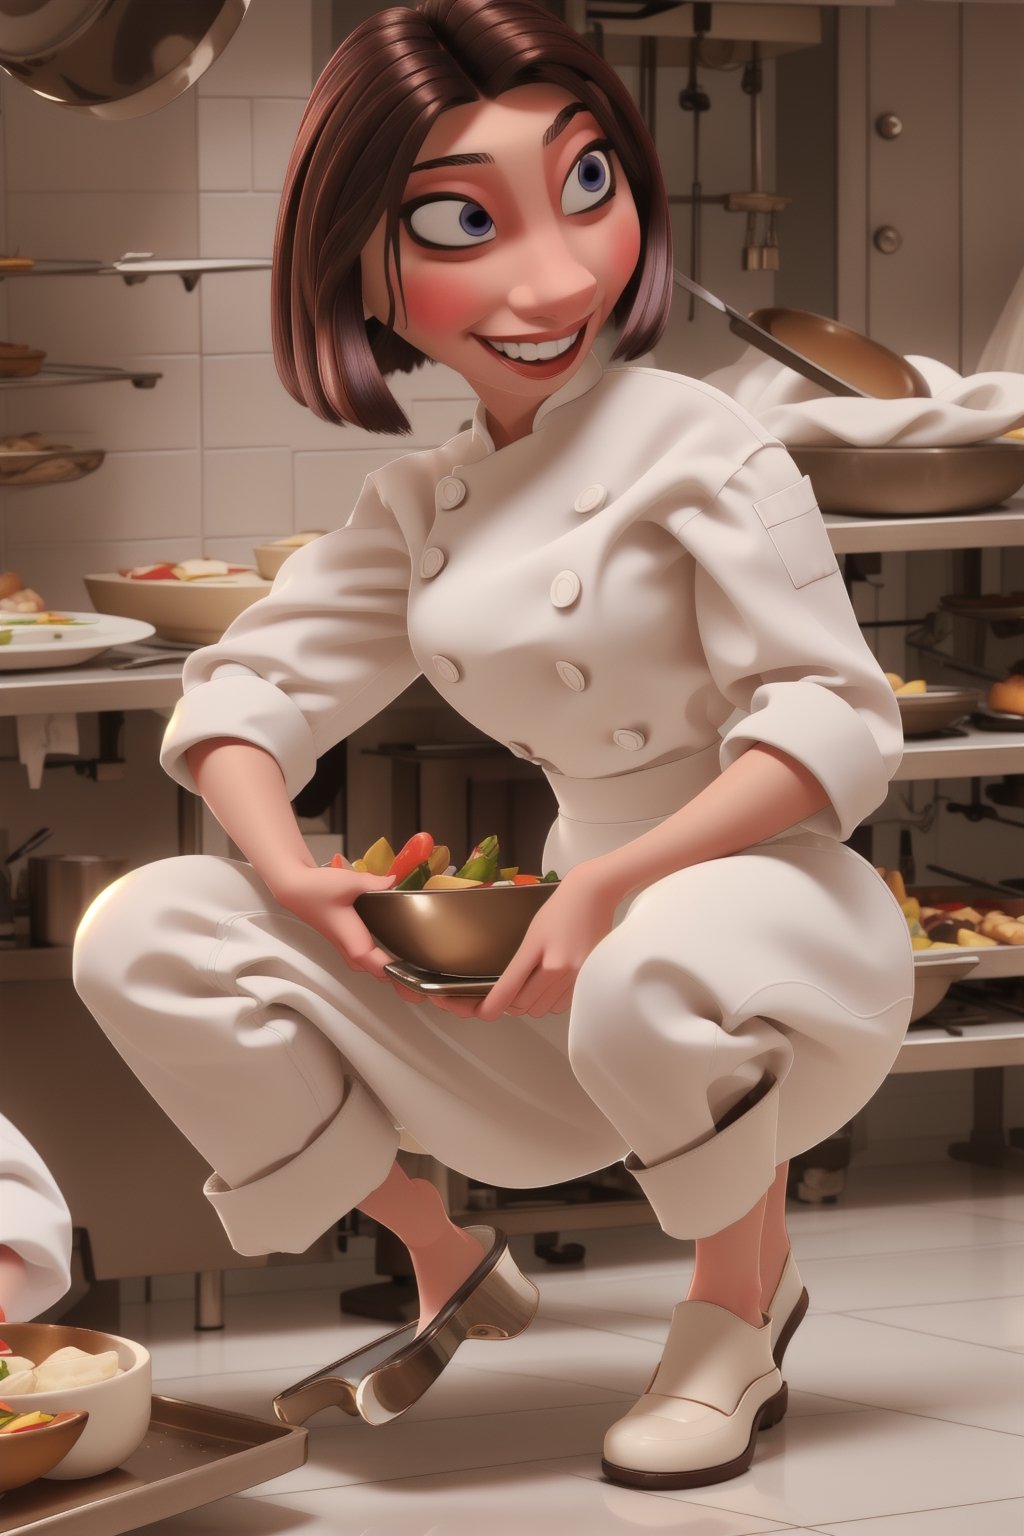 ratatouille, Colette, colettetatou, detailed eyes, brown hair, smiling, (white chef's uniform), open shirt, holding tray, large breasts, breasts out, squatting naked